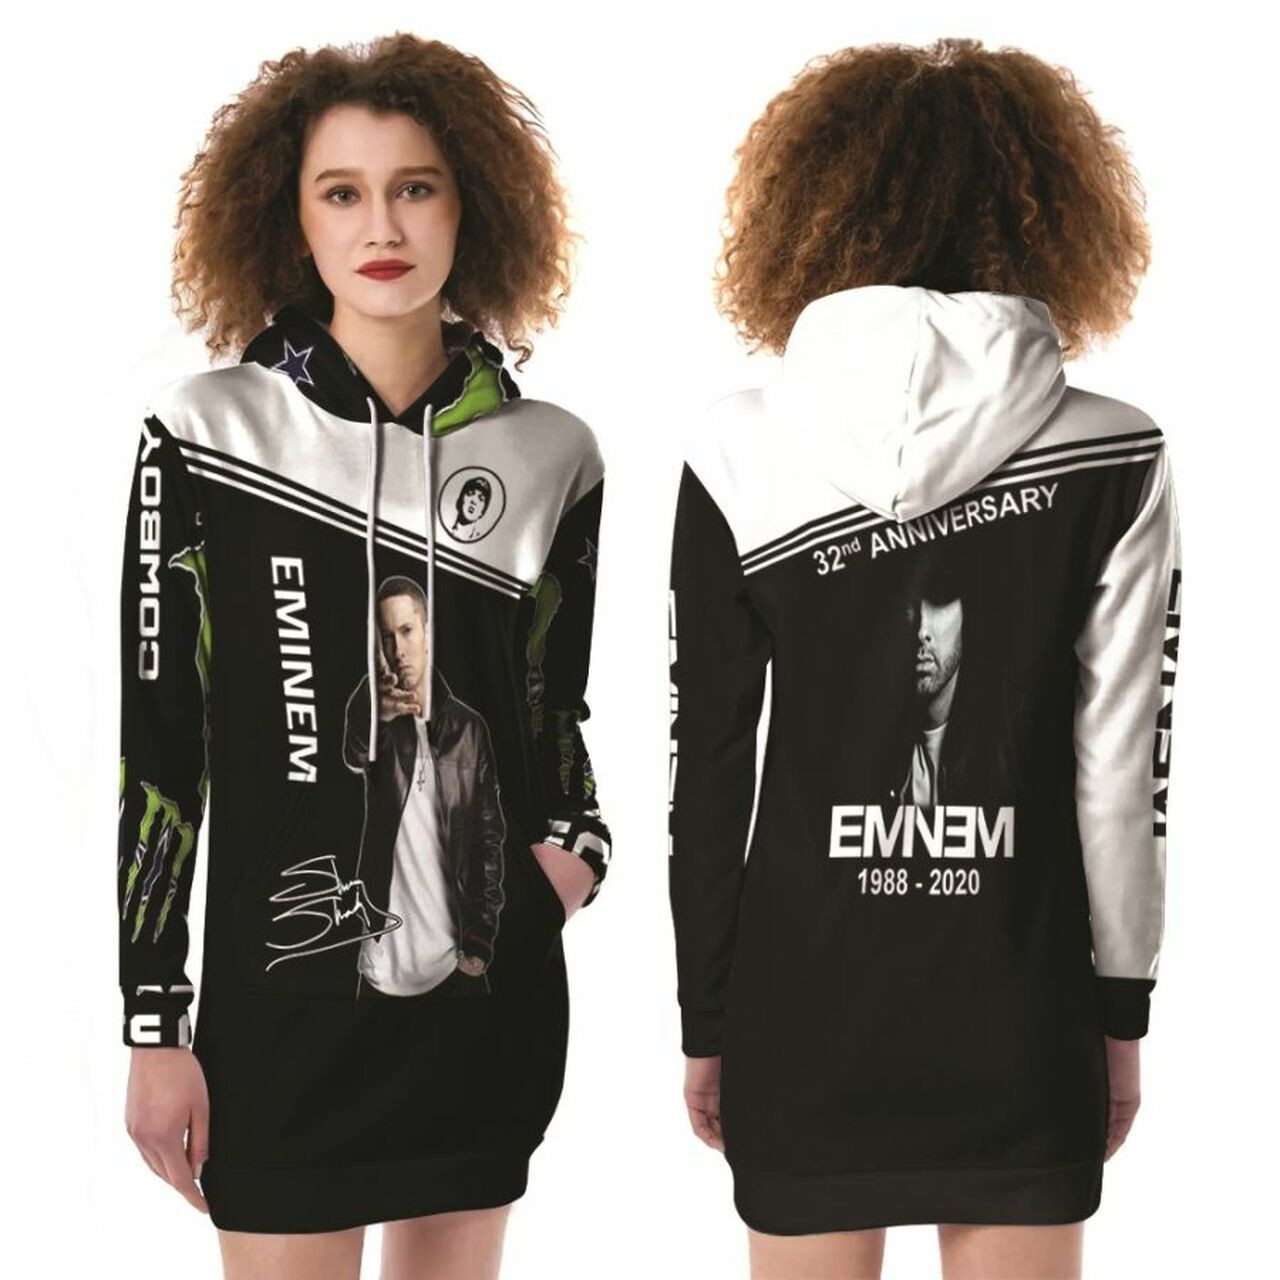 Monster Energy Dallas Cowboys Combination Gift For Monster Energy Lovers Dallas Cowboys Fans Fleece Hoodie Dress